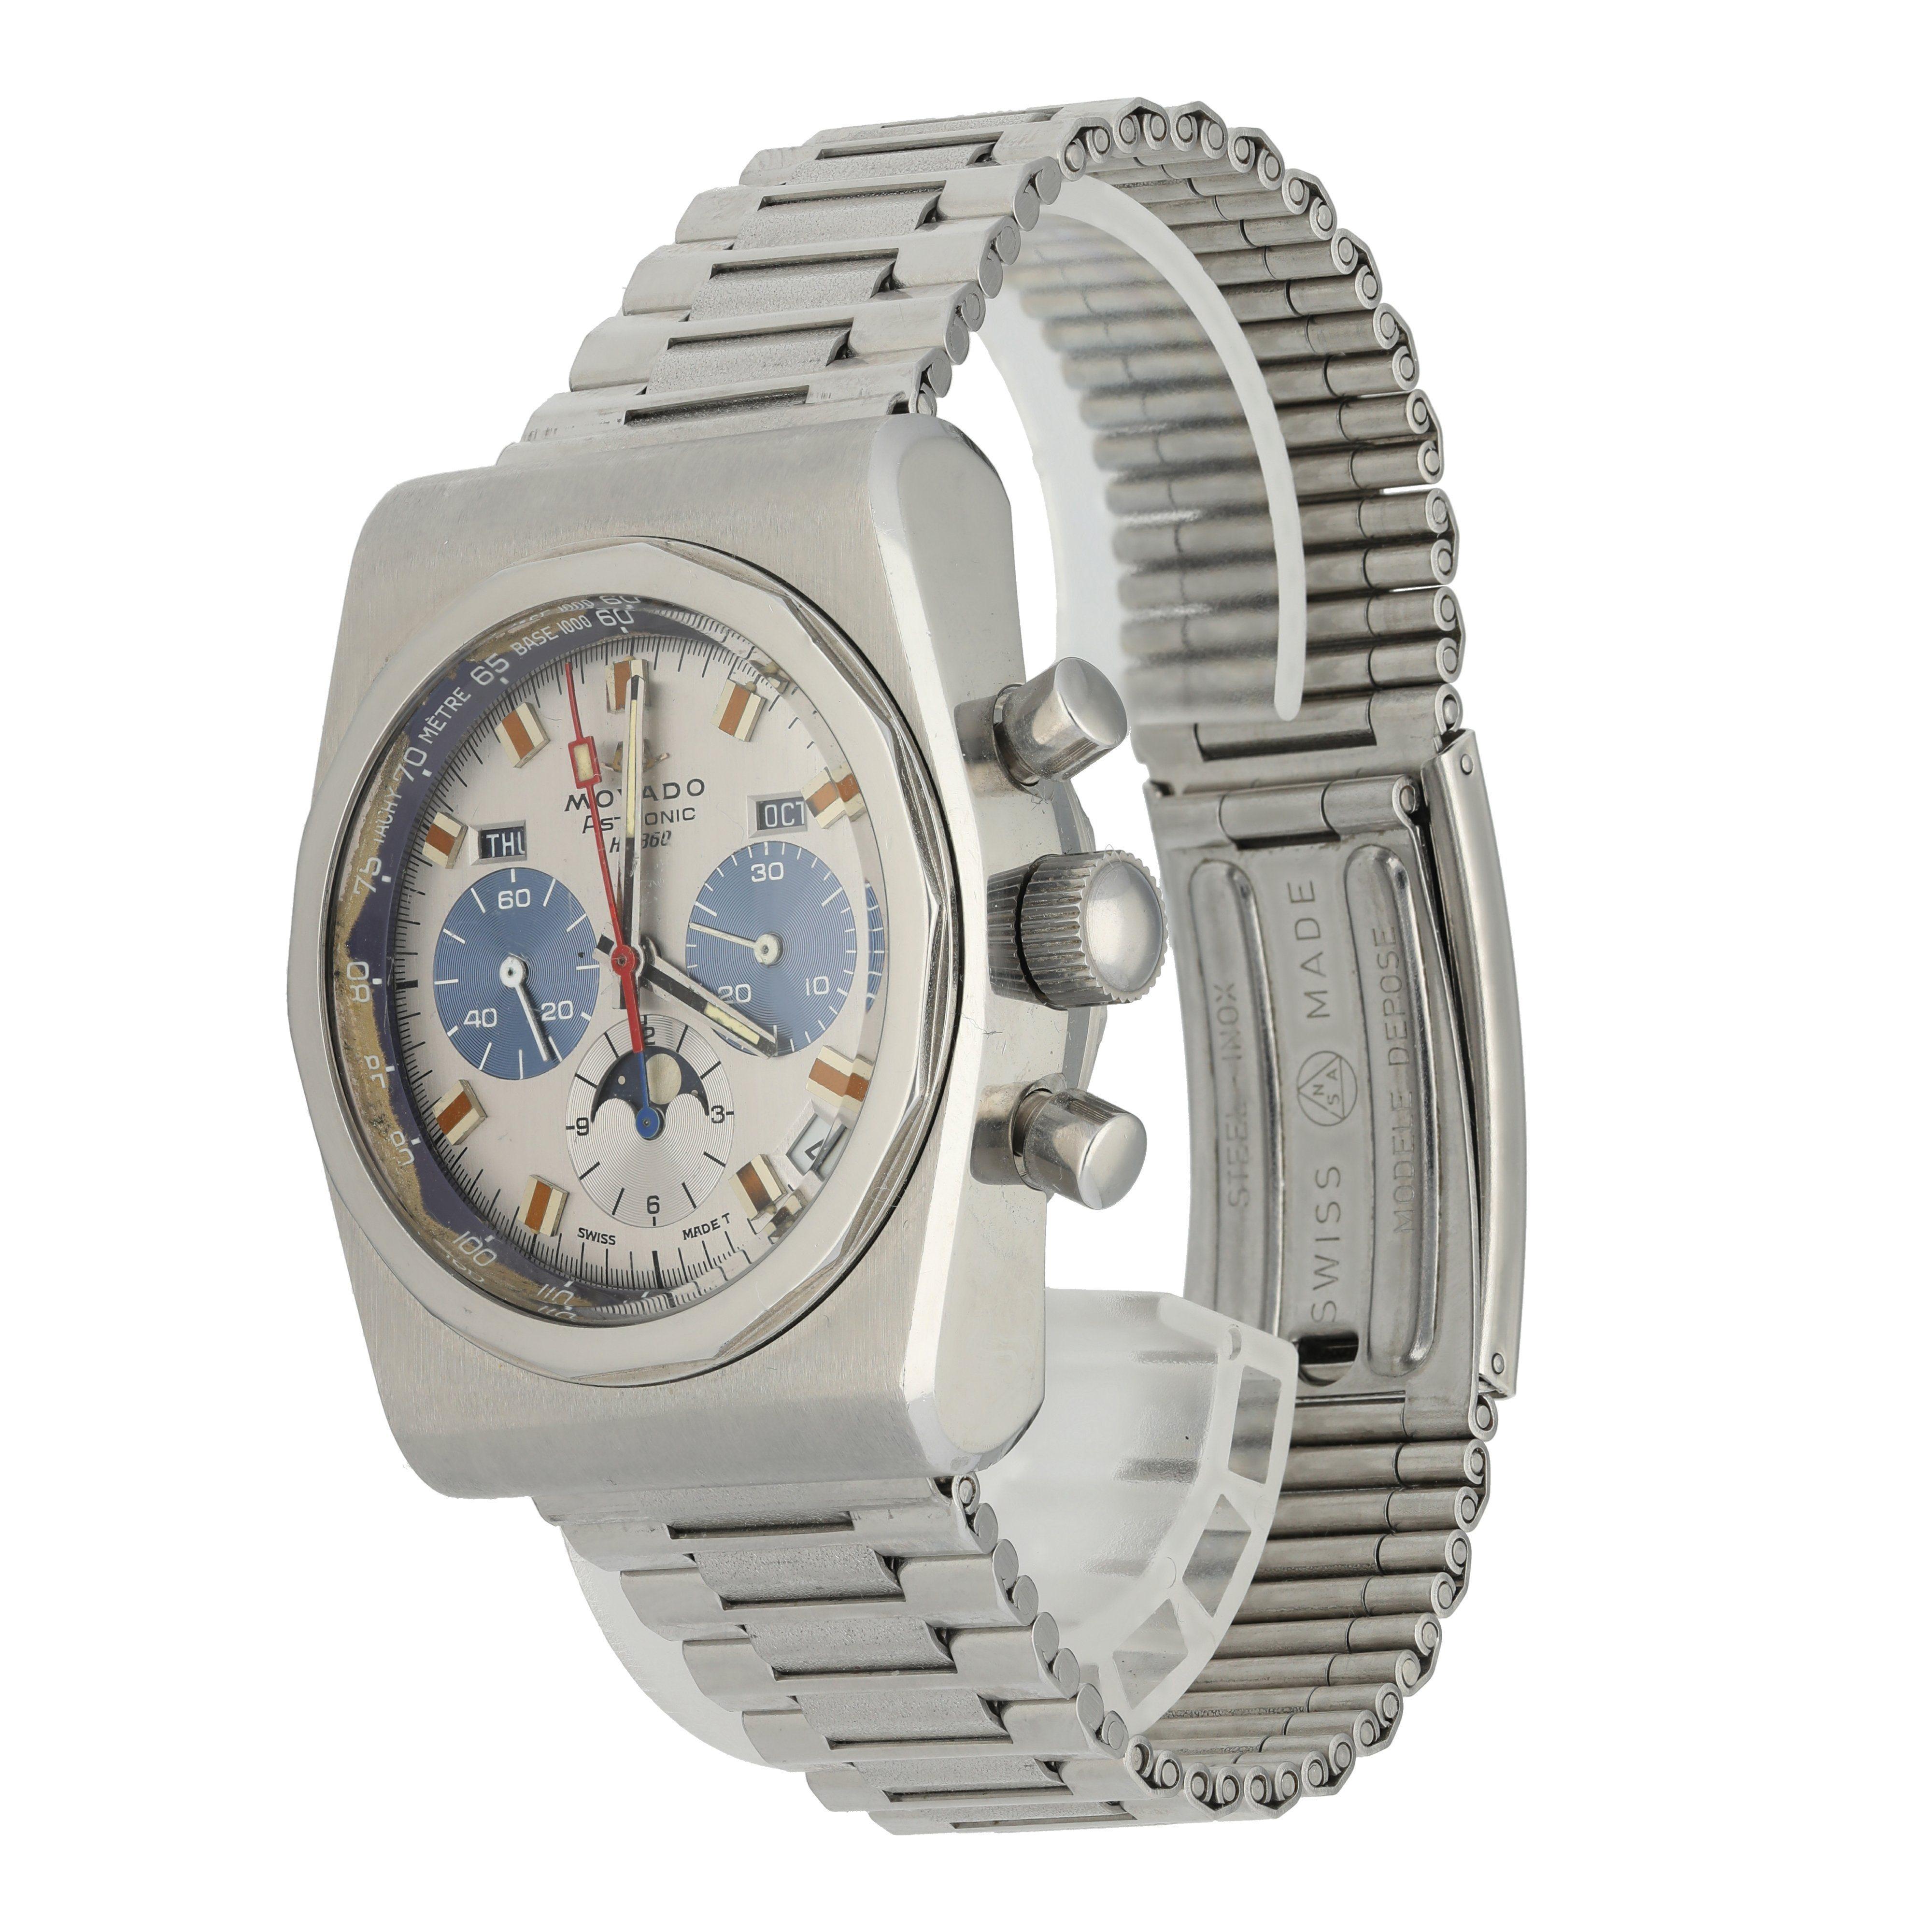  Movado Astronic HS 360 Chronograph Vintage Men's Watch.
 38mm Stainless Steel case. 
 Stainless Steel Stationary bezel. 
 Silver dial with steel hands and index hour markers. 
 Minute markers on the outer dial. 
 Date display between the 4 & 5